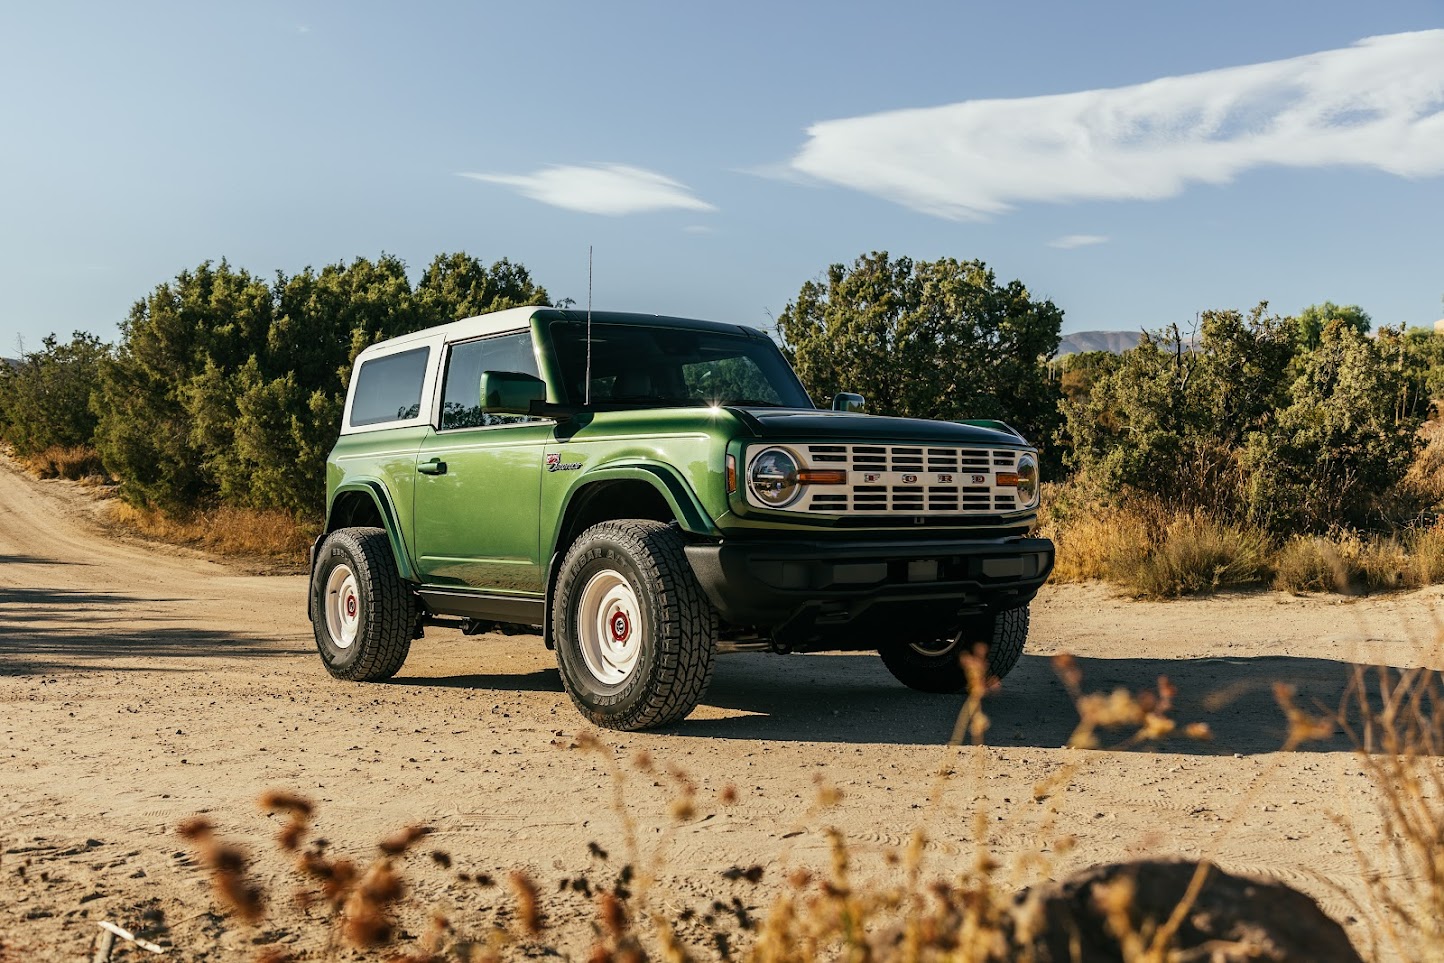 Ford Bronco Analog Wheels on a 2023 Bronco - Fifteen52 Photoshoot Res8